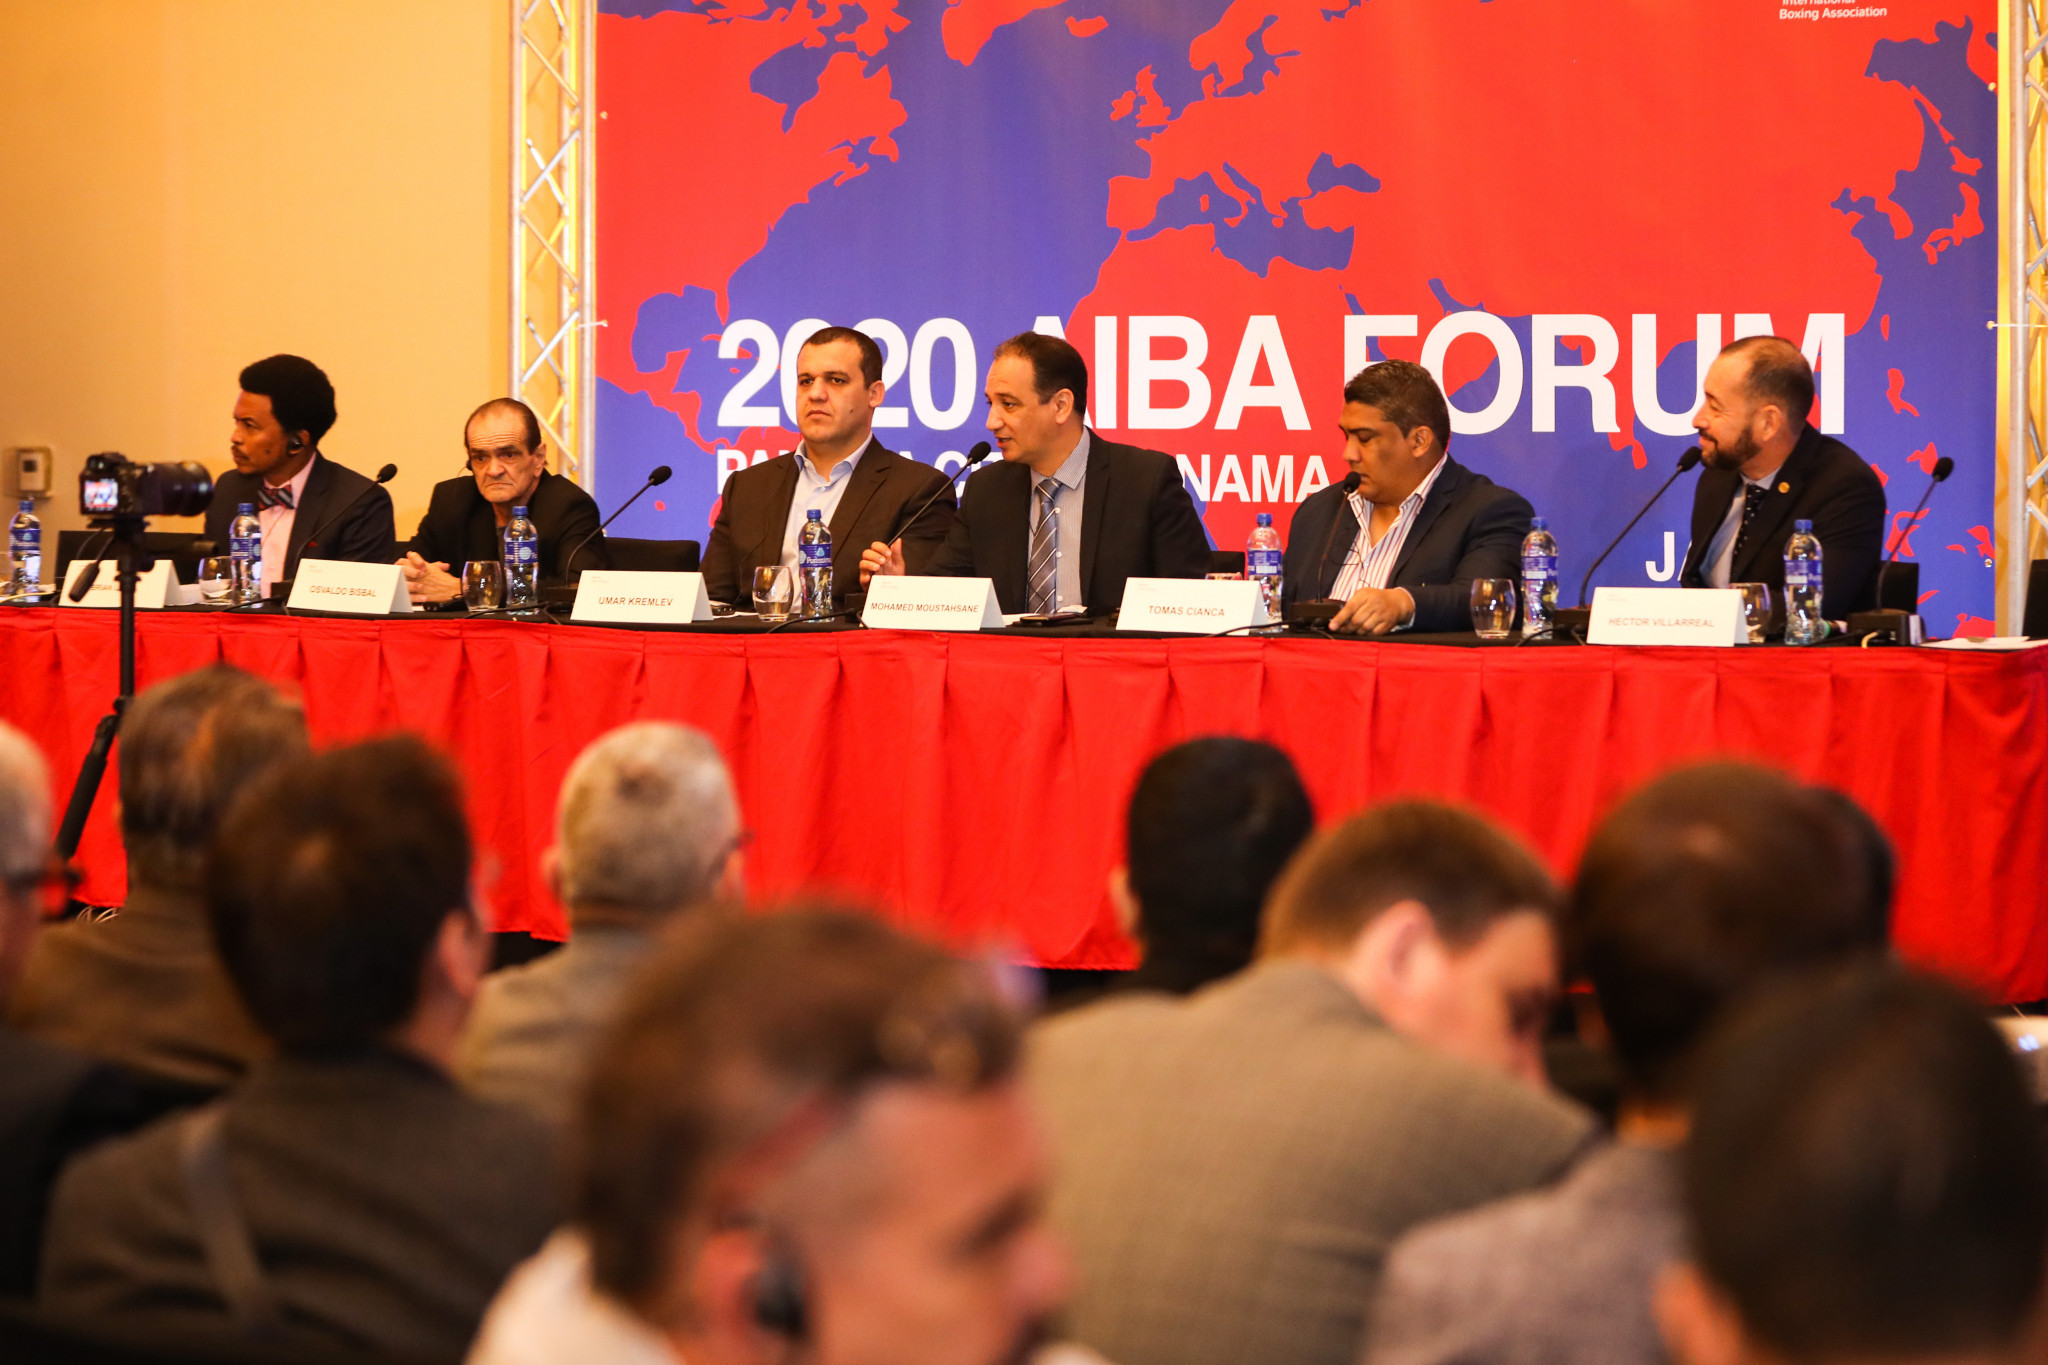 AIBA promise small countries assistance with attending international events